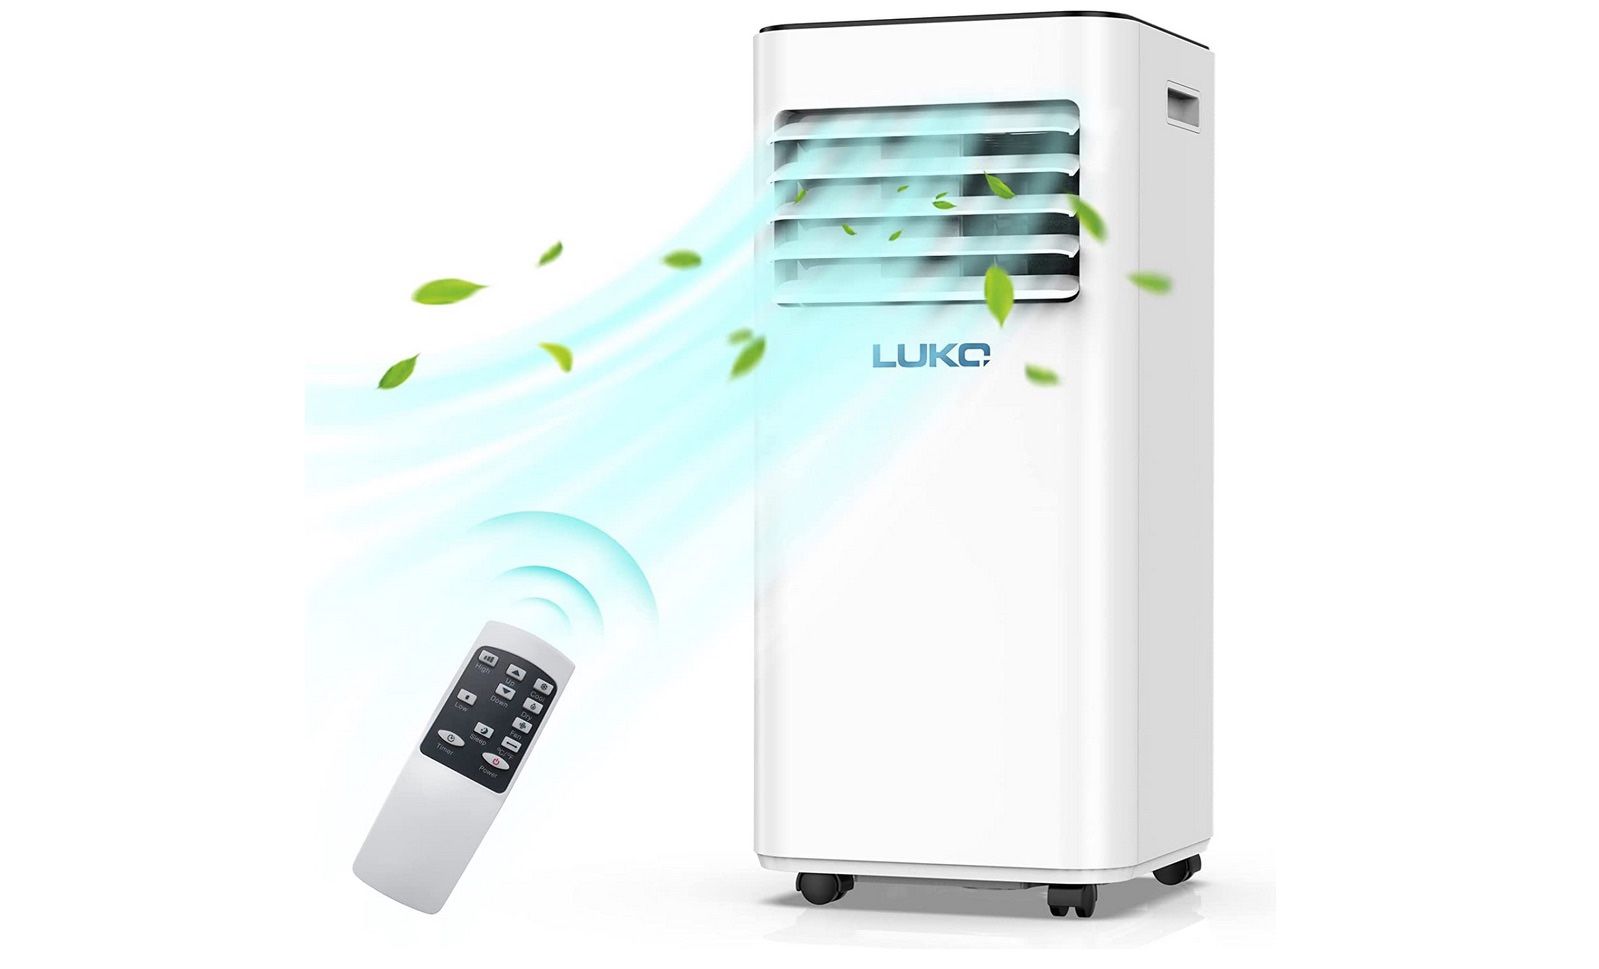 LUKO Portable Air Conditioner 8000 BTU, Cooling, Fan, Dehumidifier 3-in-1 AC Unit for Rooms up to 300 Sq. Ft, Includes Child Lock, Remote Control and 